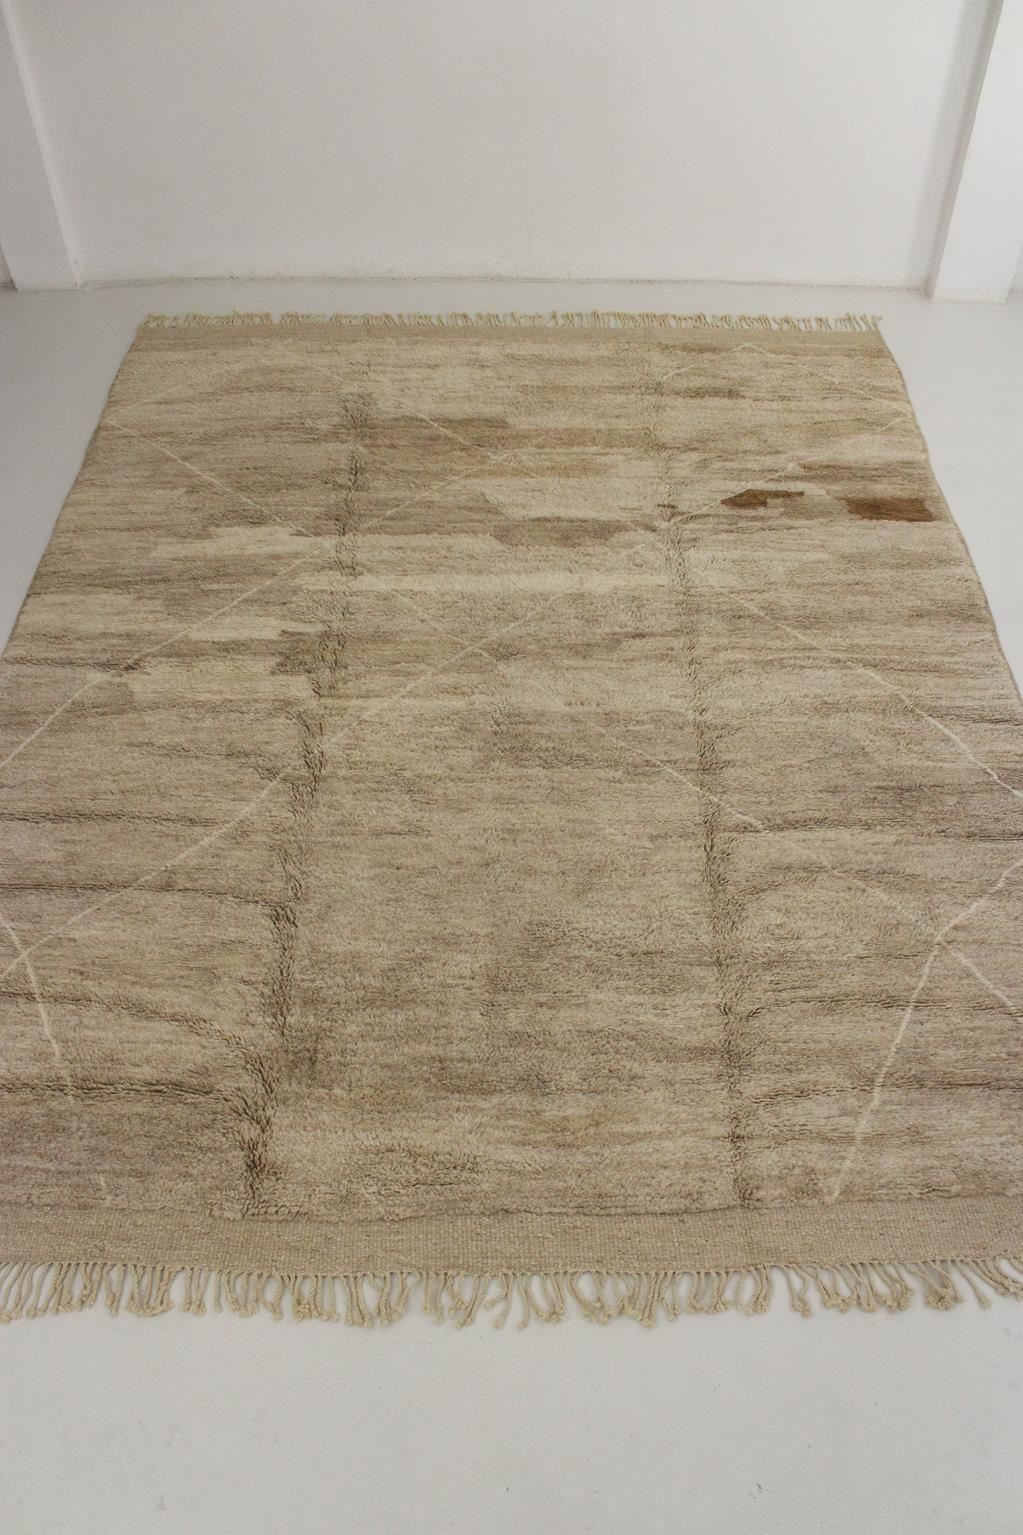 I had this modern-style, original Mrirt rug made by weavers artisans in the area of Khenifra, Atlas Mountains, Morocco. Groups of women there still weave by hand on traditional, vertical looms to make these new rugs!

Several tones of light brown,